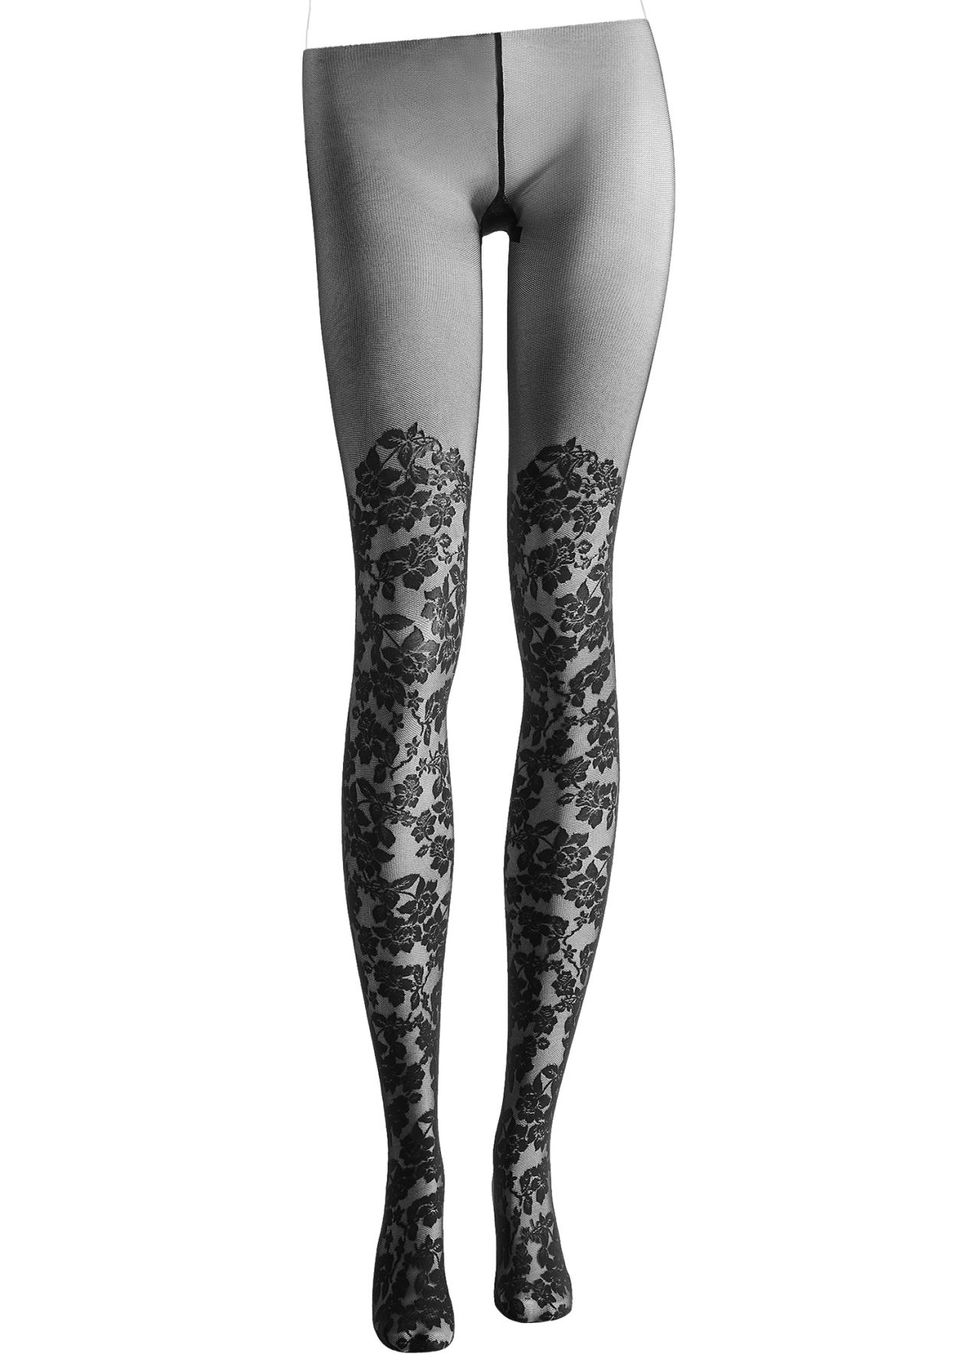 Human leg, Joint, Style, Black, Thigh, Black-and-white, Monochrome, Monochrome photography, Waist, Tights, 